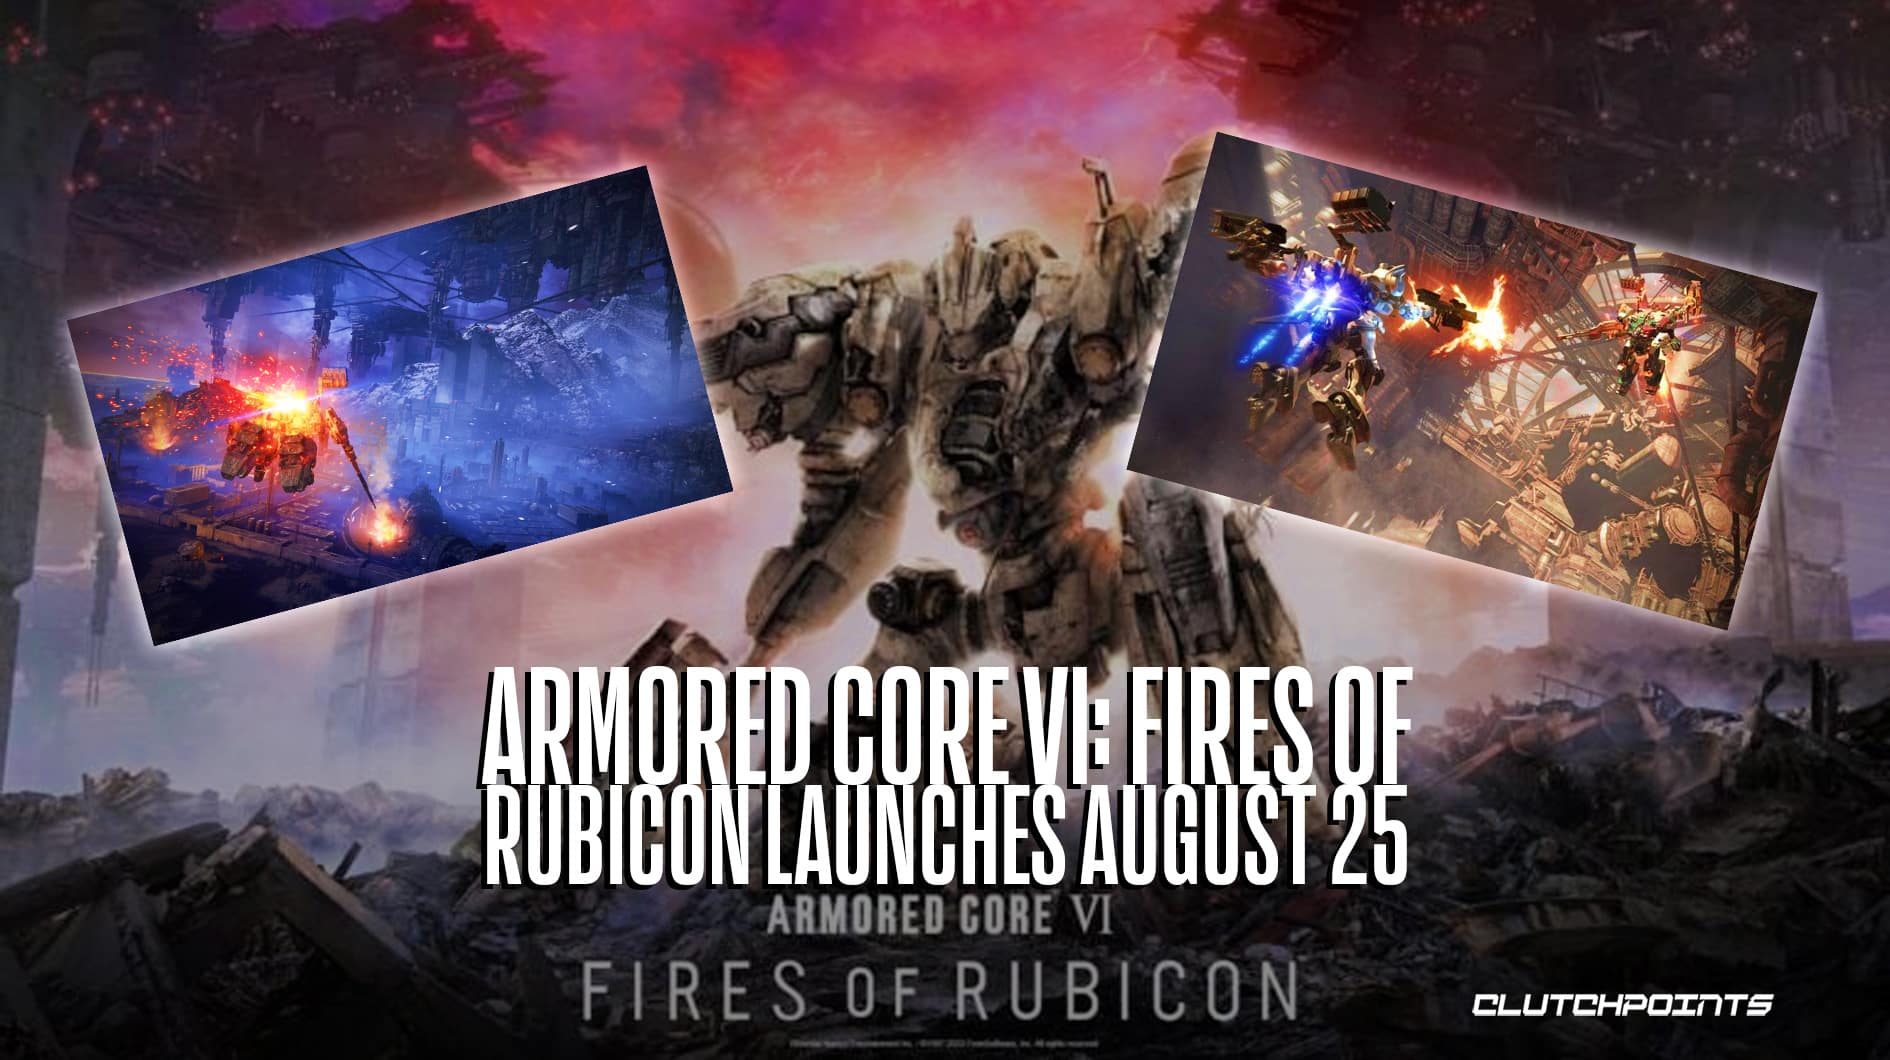 Fires Release Core Fall Confirmed Armored of VI: Rubicon for